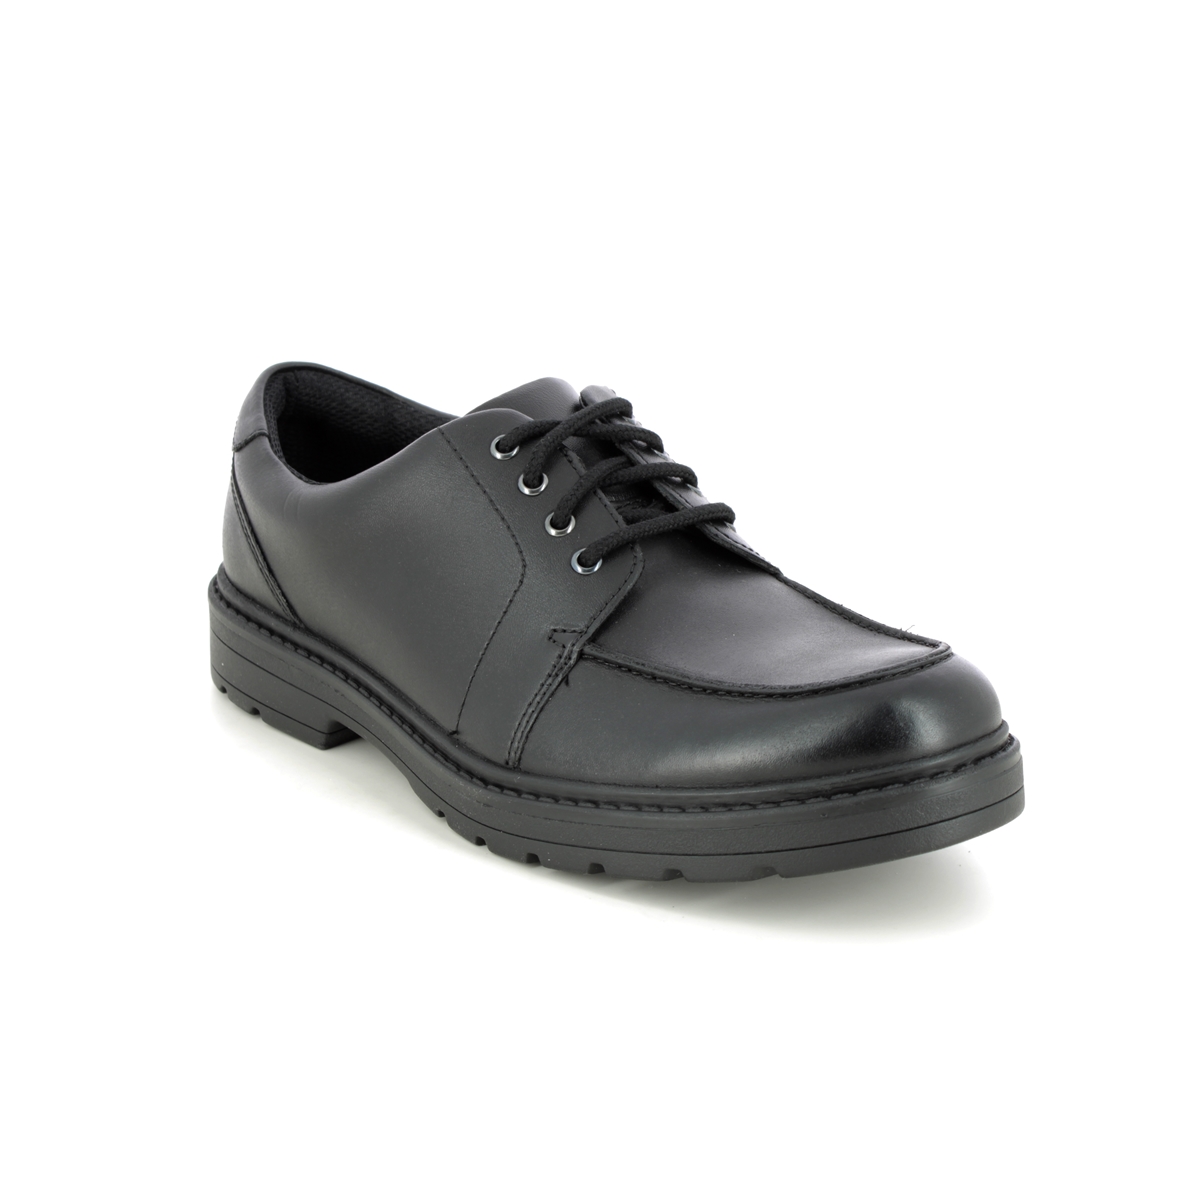 Clarks Loxham Pace Y Black Kids Boys Shoes 515926F In Size 6 In Plain Black F Width Fitting Regular Fit For School For kids